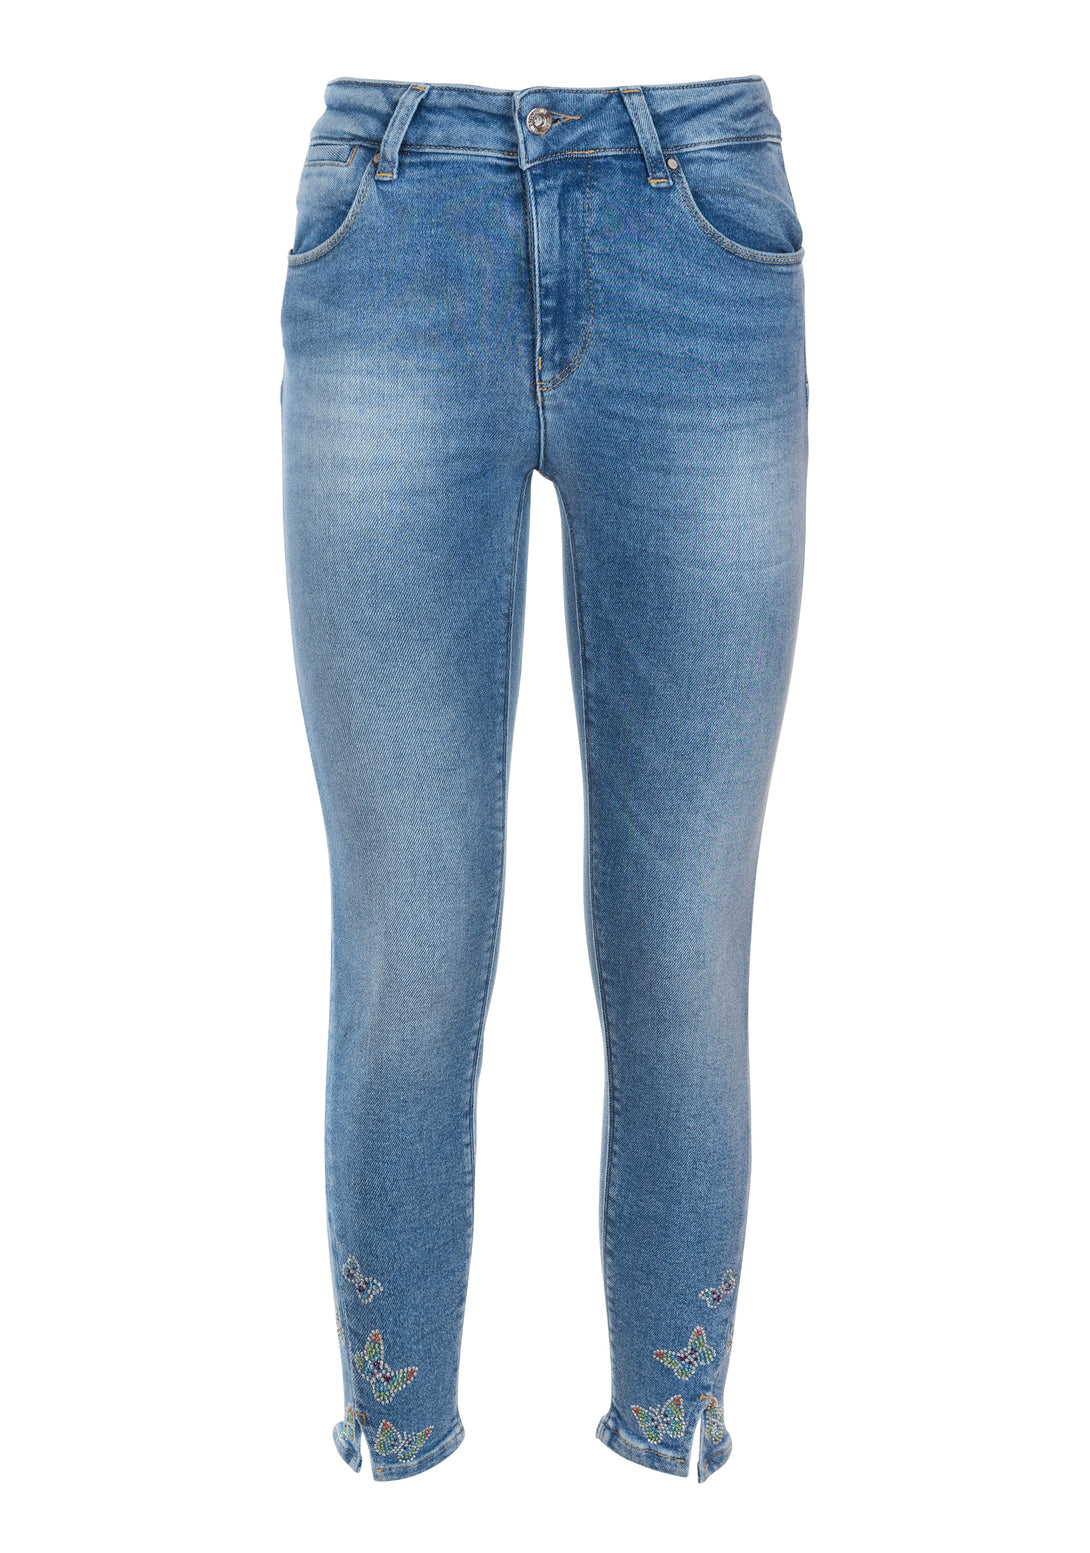 Jeans slim fit made in denim with middle wash